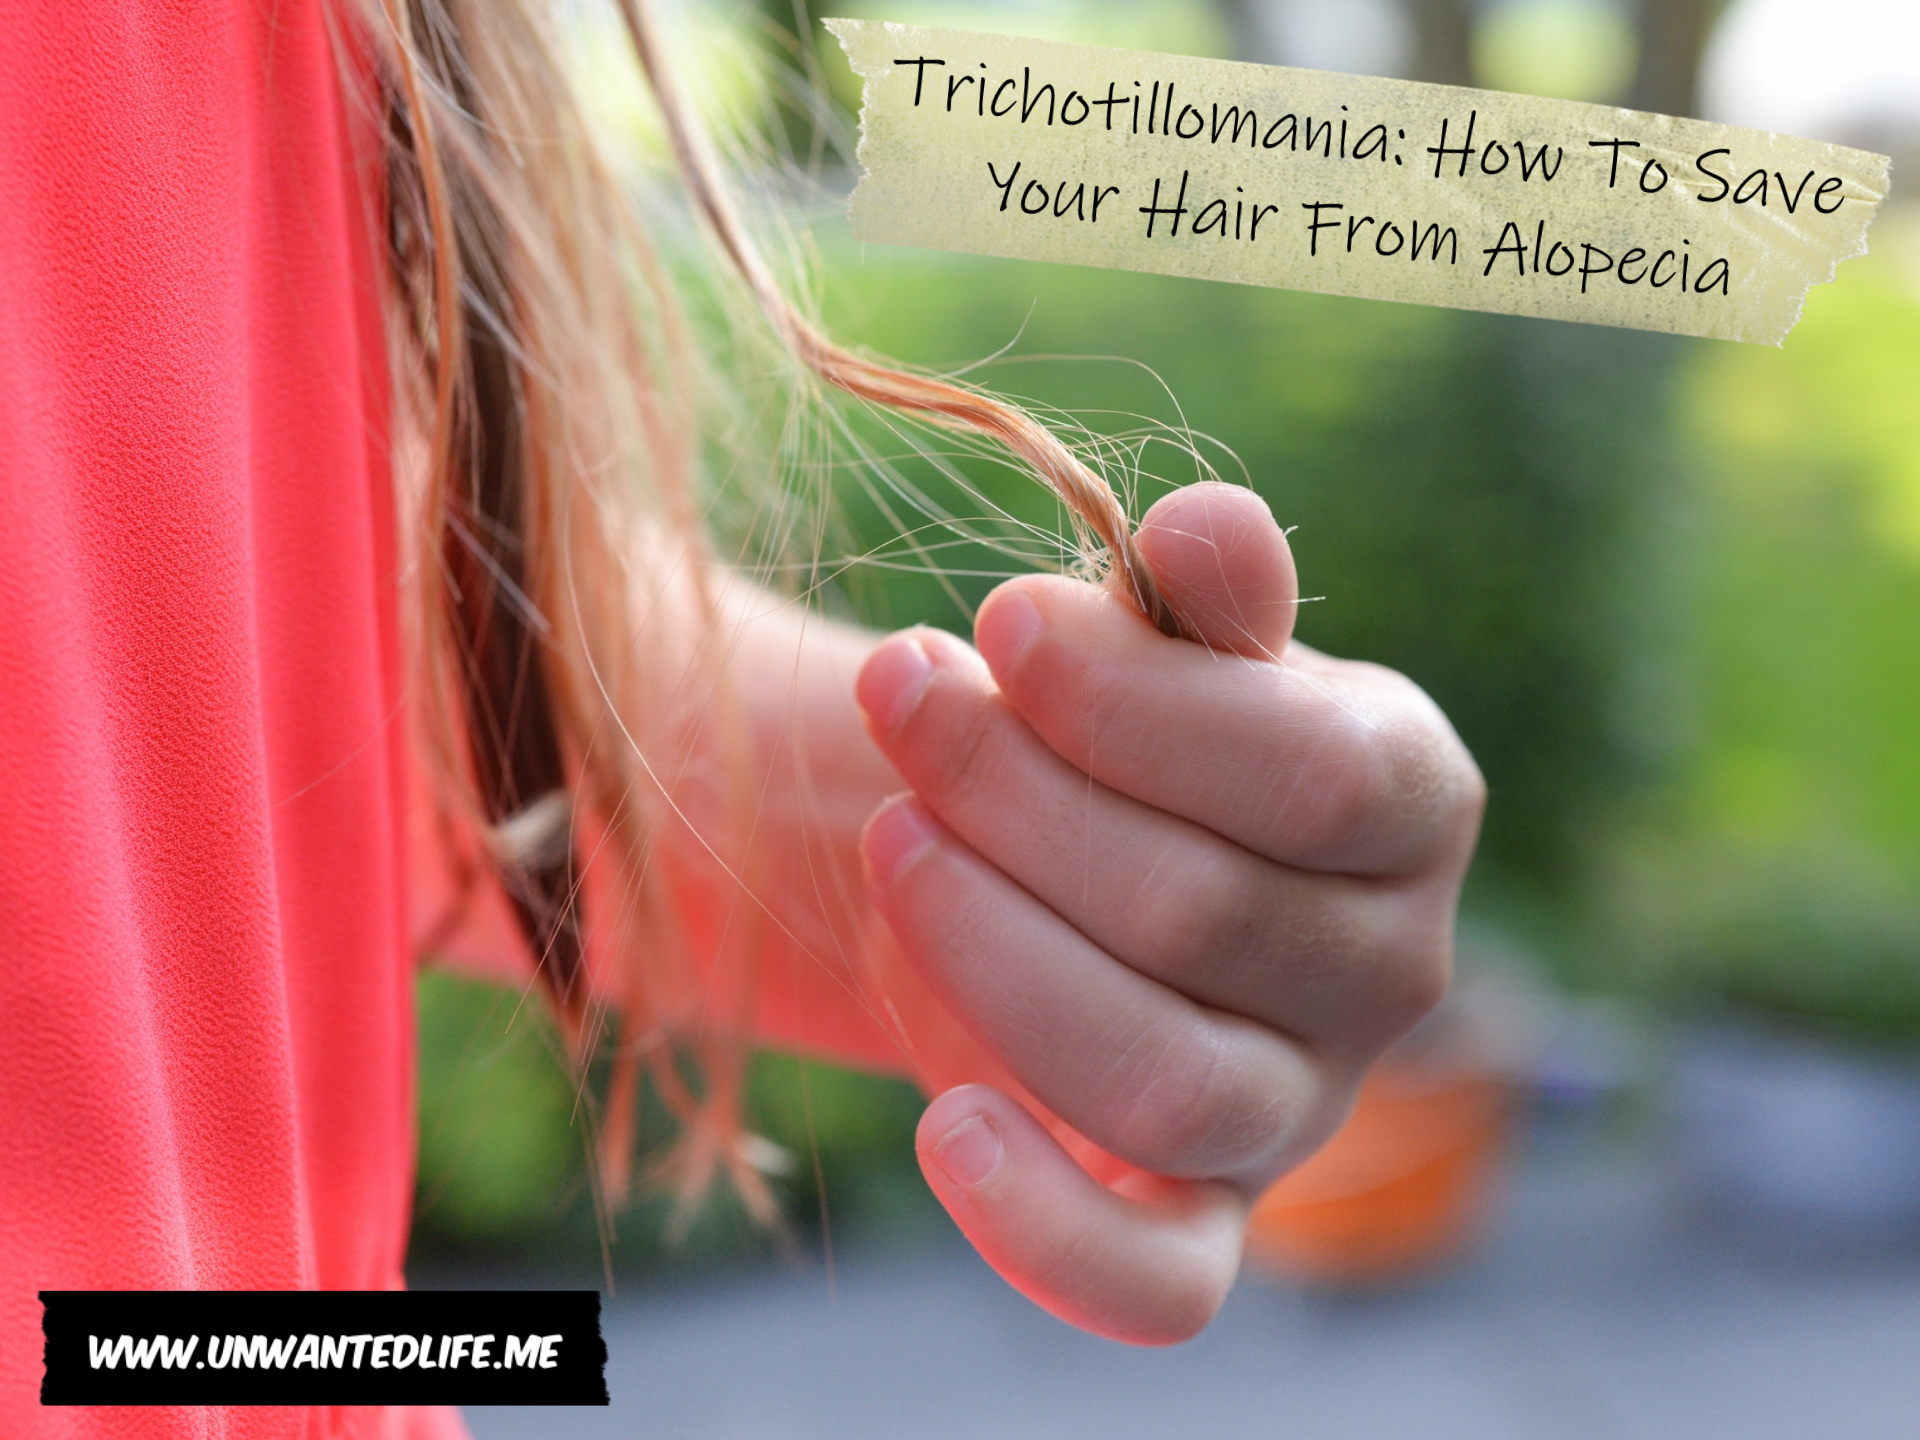 An image of a young White girl twirling her long blonde hair in her fingers to represent the topic of the article - Trichotillomania: How To Save Your Hair From Alopecia